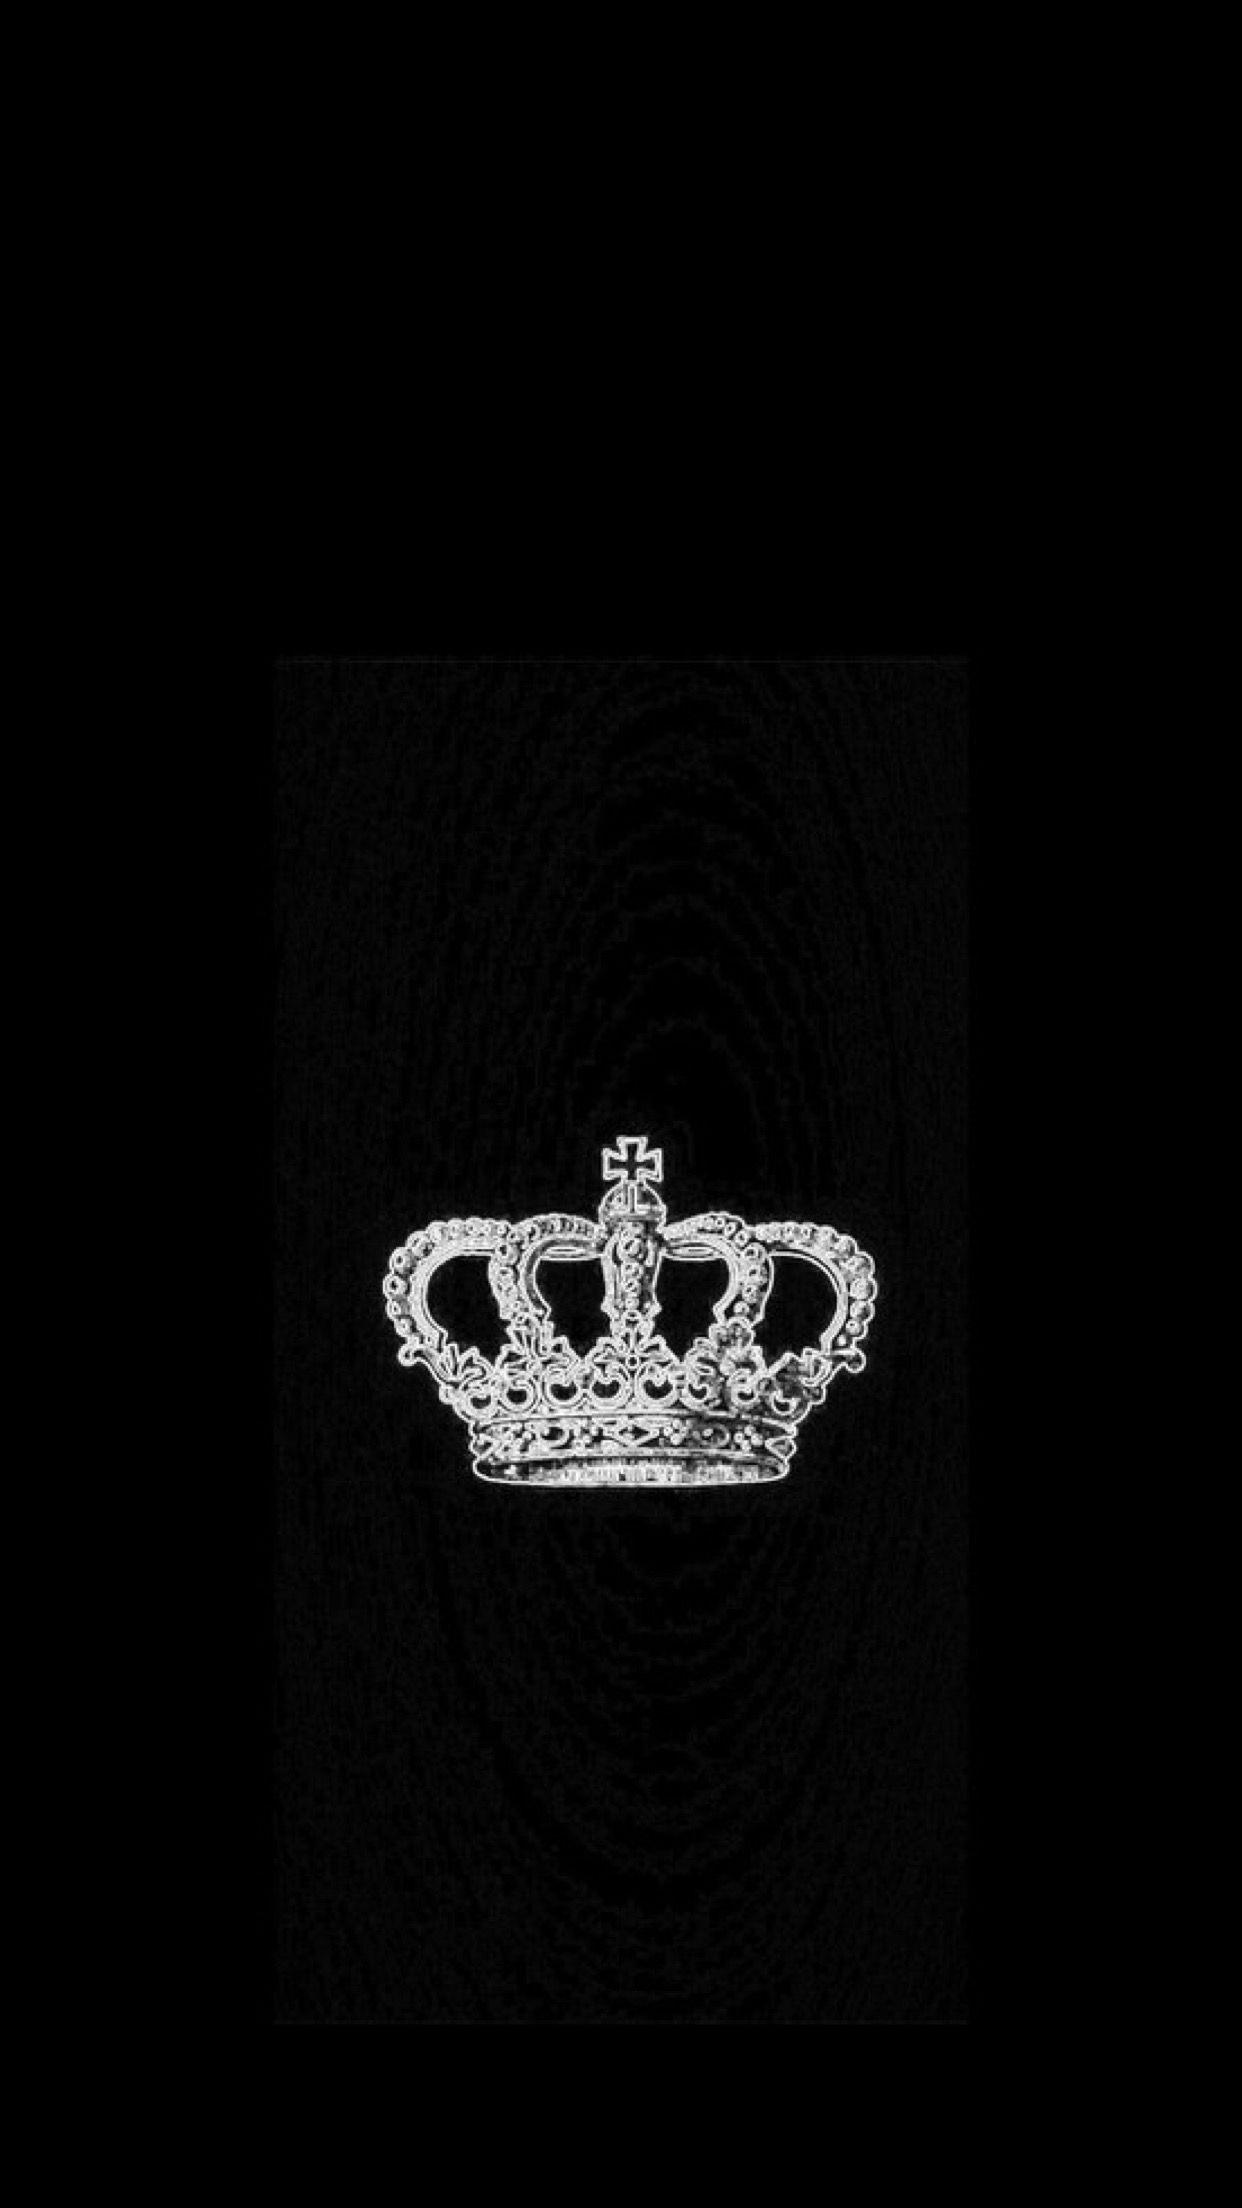 King's crown wallpapers, Regal backgrounds, Royal headgear, Crown images, 1250x2210 HD Handy